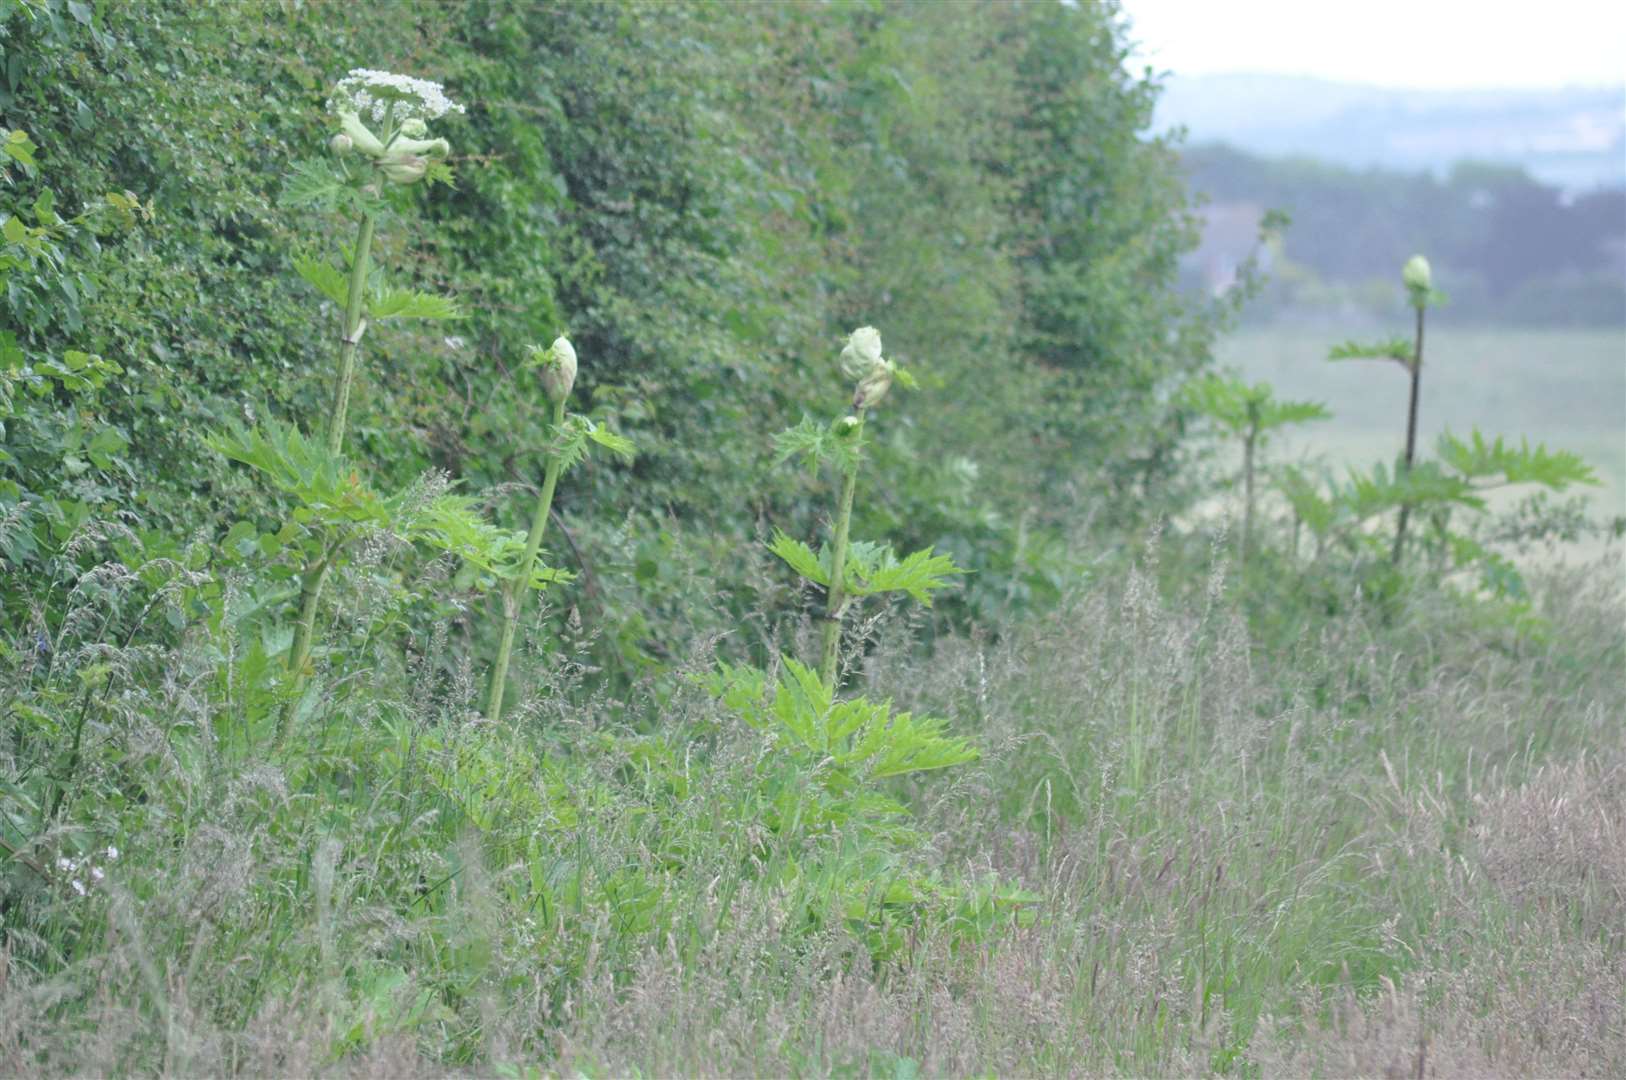 Giant hogweed can cause significant burns if exposed to the skin